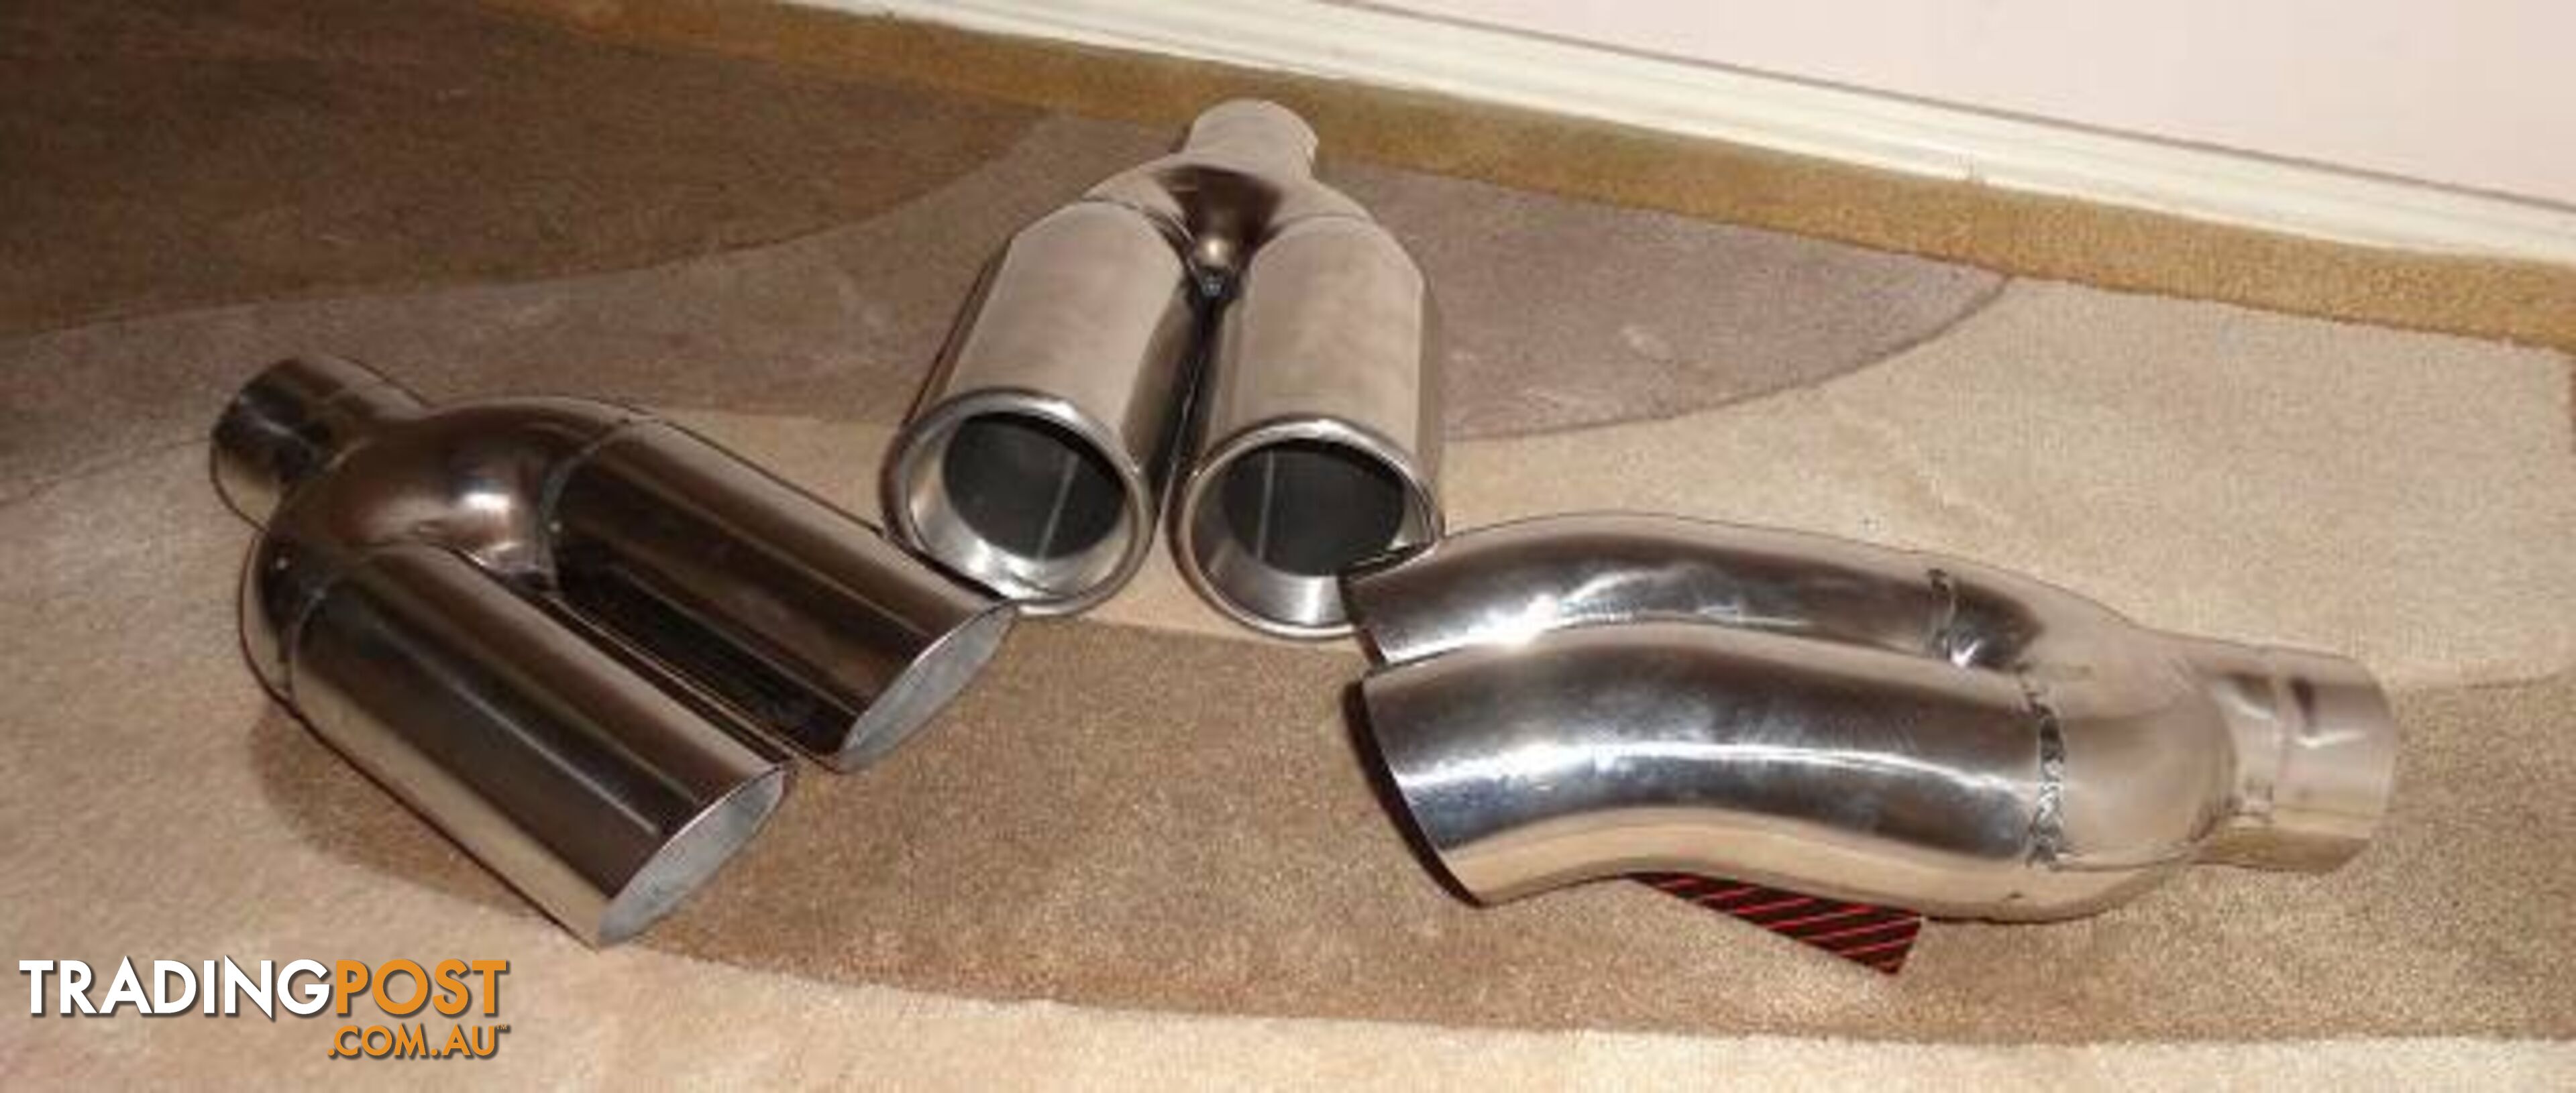 POLISHED STAINLESS STEEL MUFFLERS. From: $50.